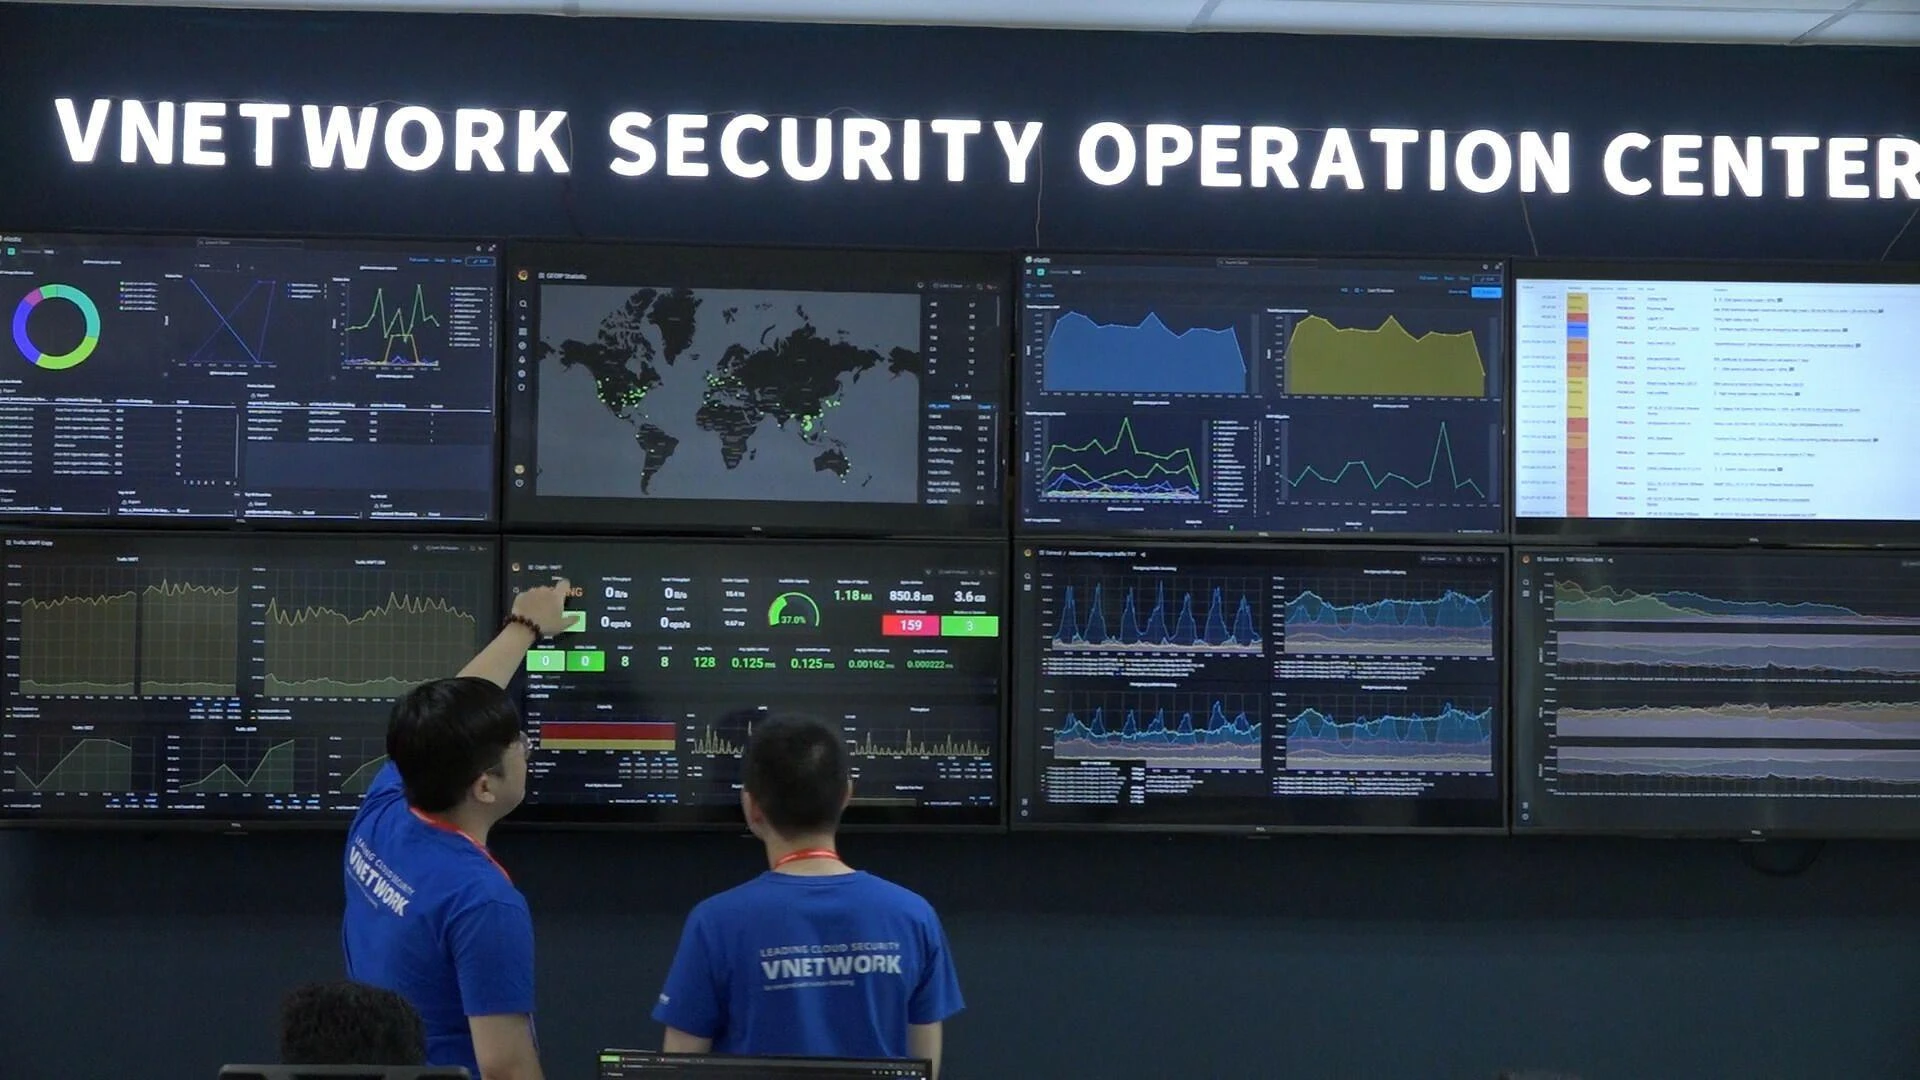 How VNETWORK SOC prevents new cyber threats